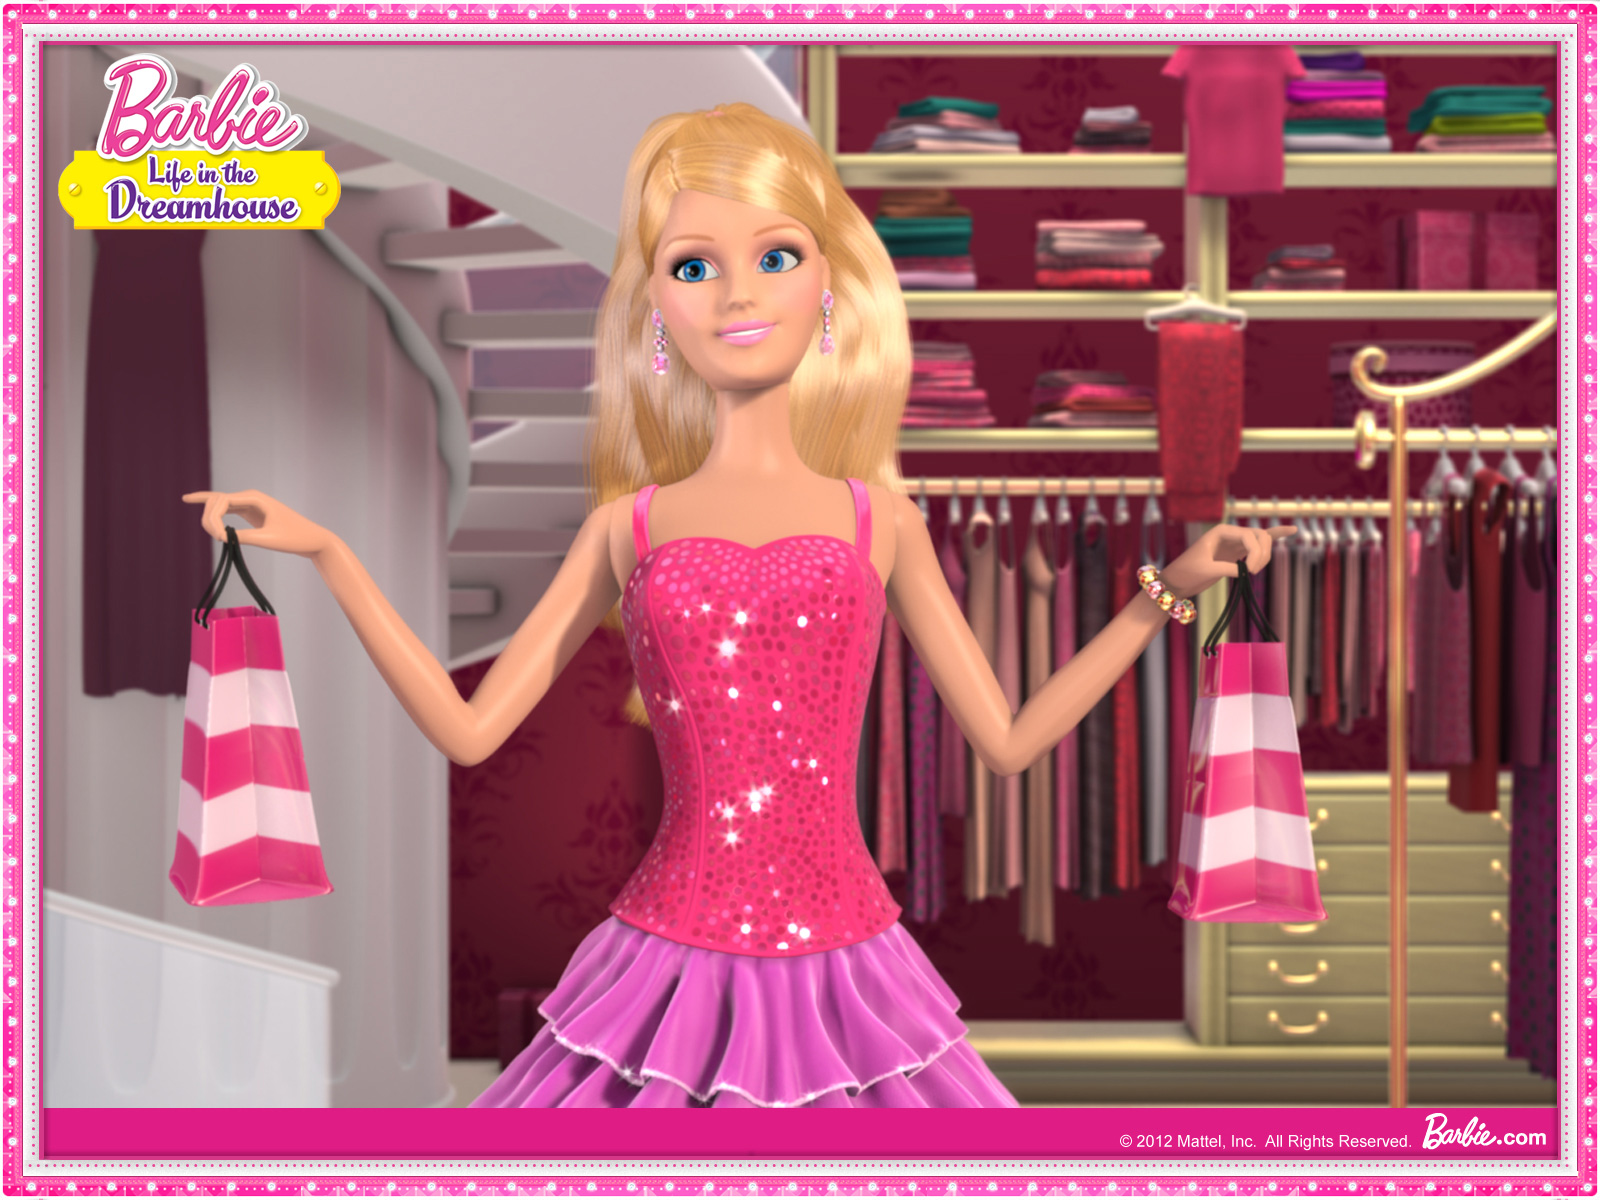 film barbie life in the dreamhouse. dreamhouse-barbie-movies-30807873. 